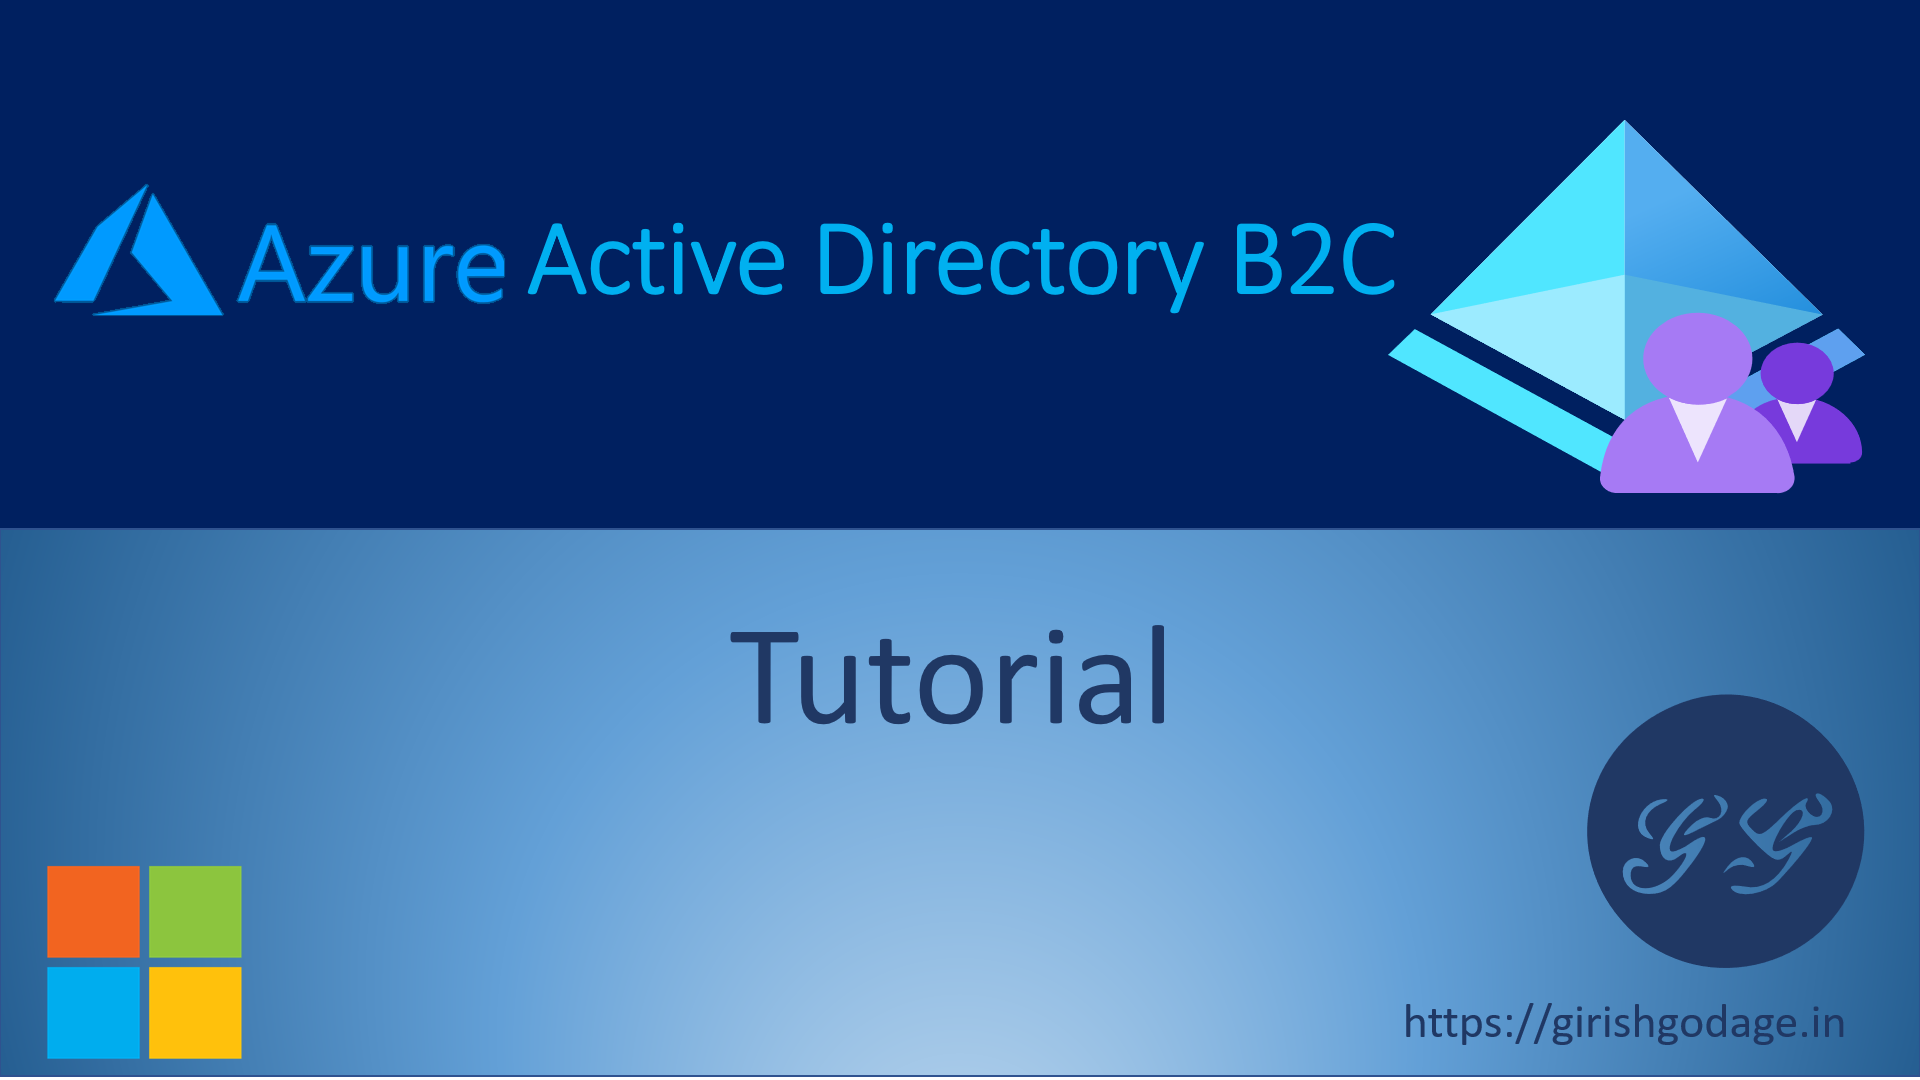 Create user flows in Azure Active Directory B2C